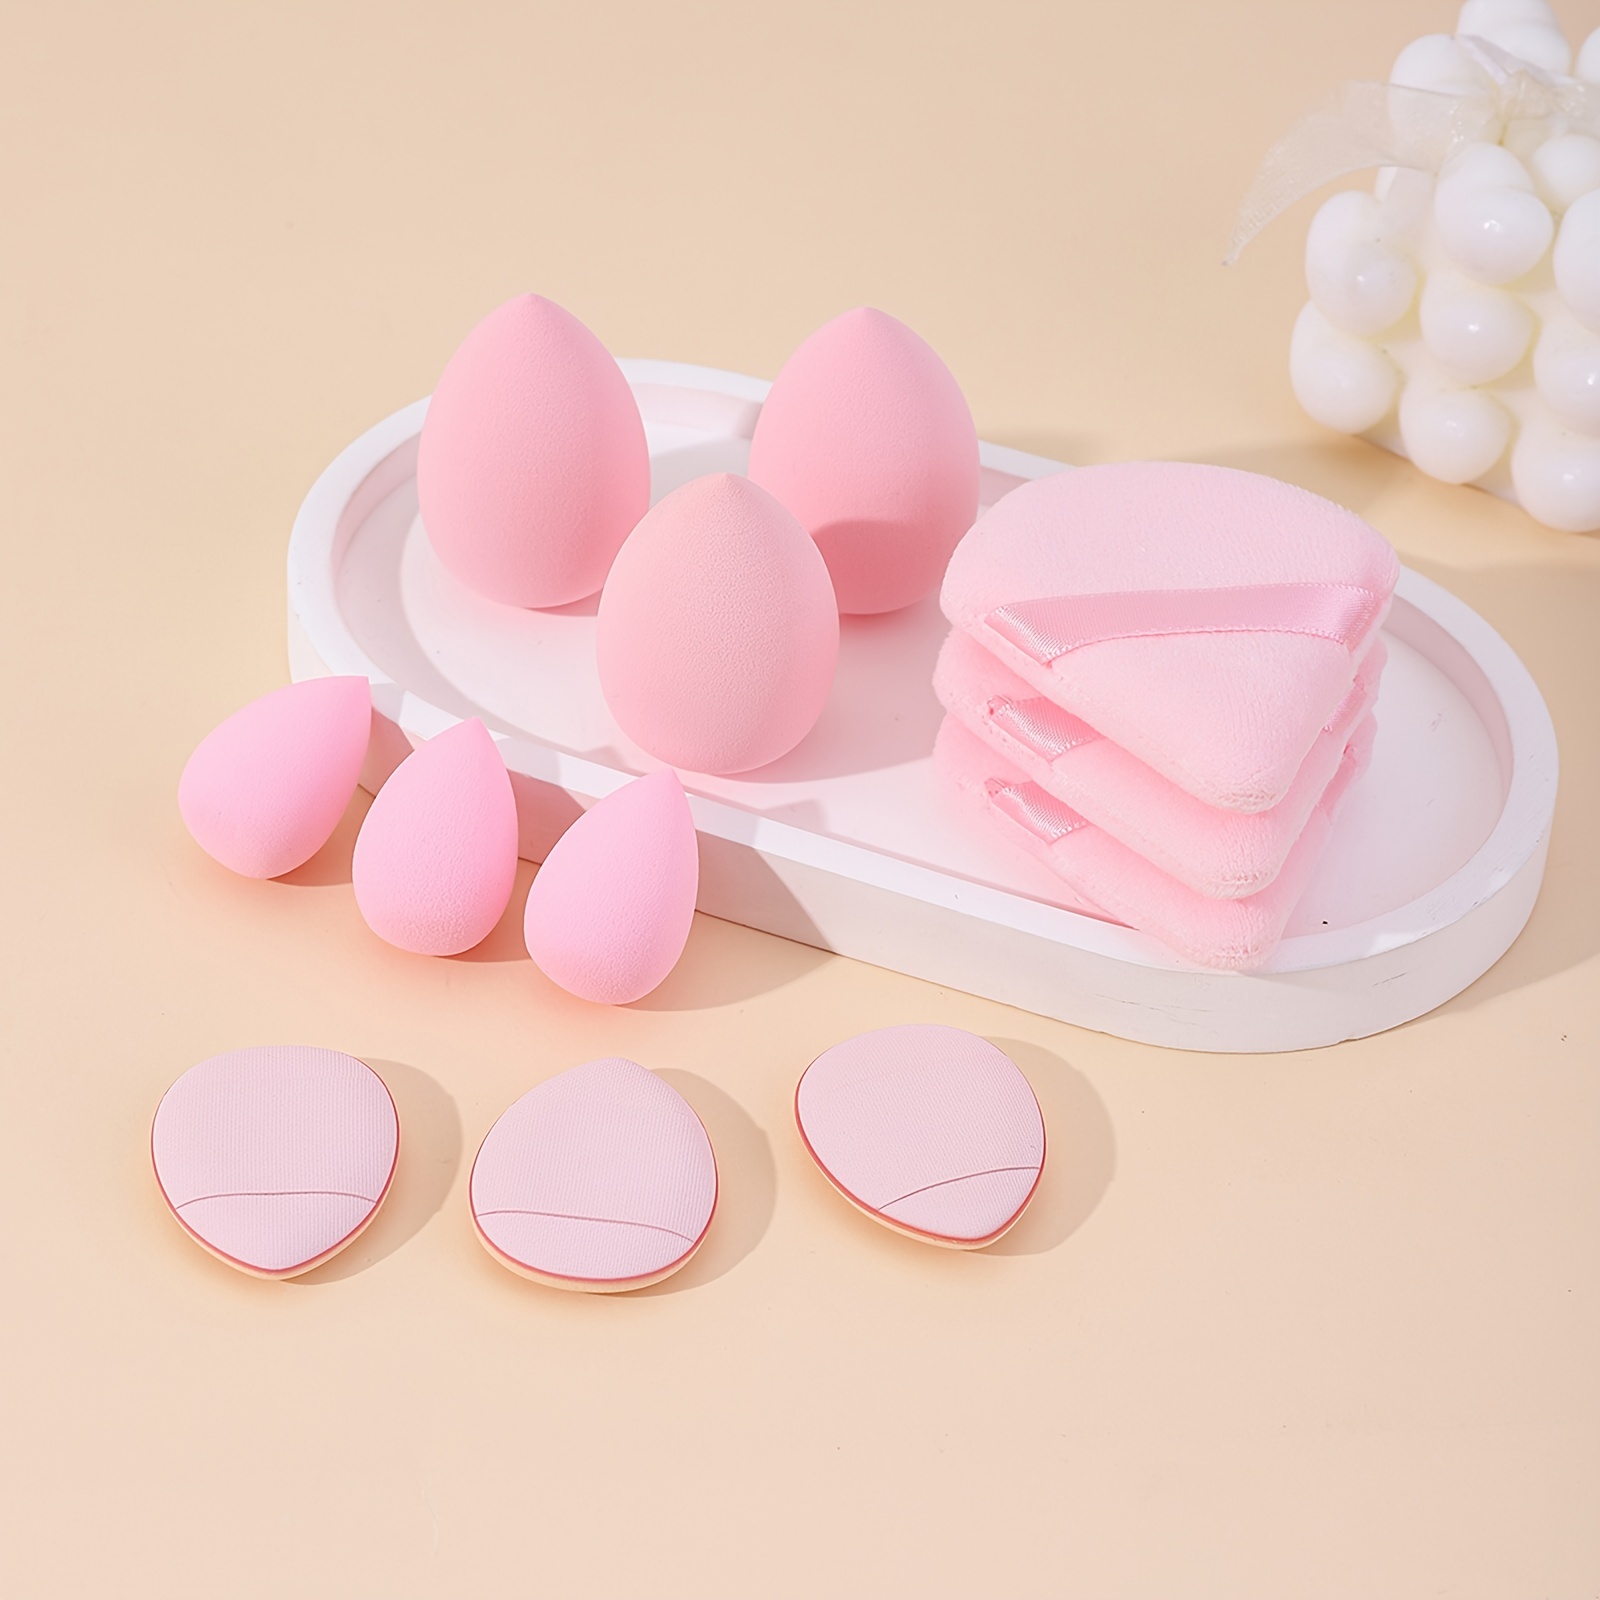 

12pc Pink Makeup Sponge Puff Set, Beauty Blender Sponges Kit For Foundation Blending, Flawless Cosmetic Applicators, Soft Beauty Make-up Tools With Different Shapes & Sizes